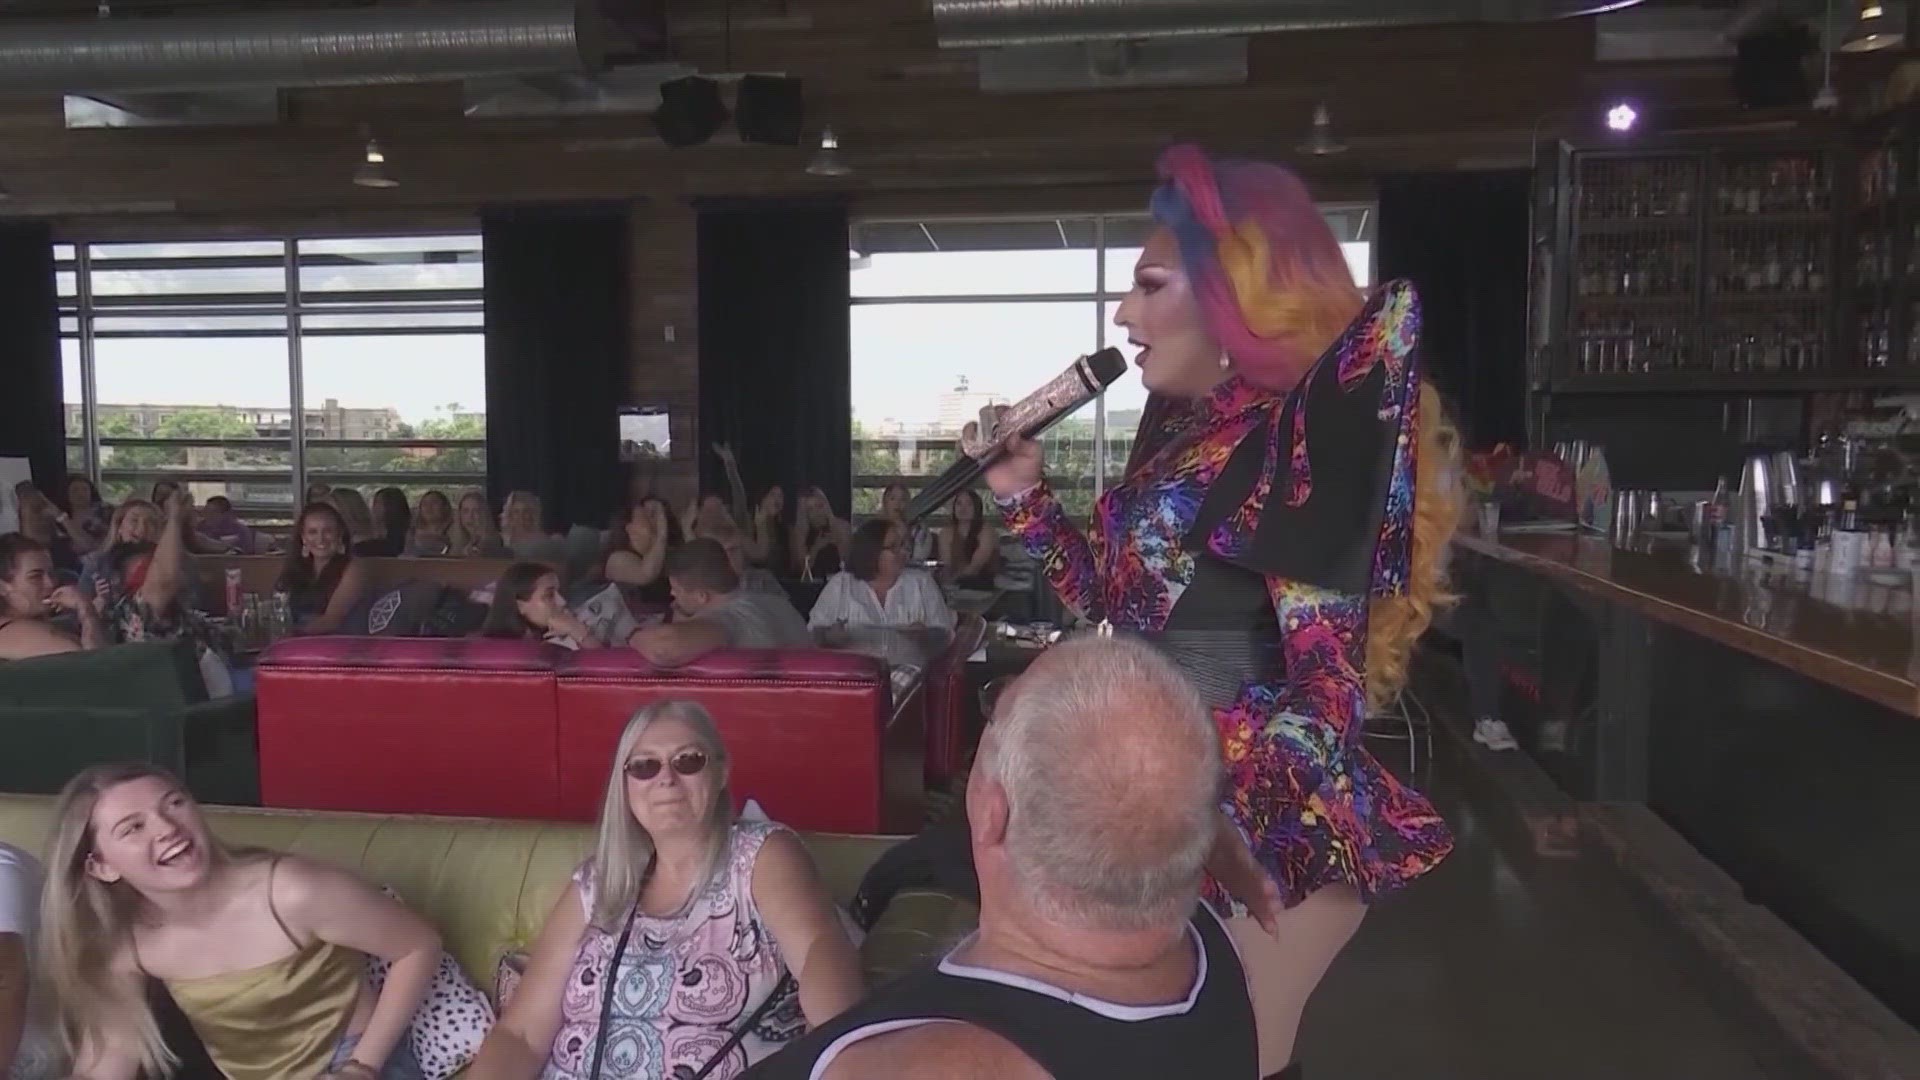 Senate Bill 12 would criminalize some drag shows, but a federal judge is deciding whether to allow them to continue.